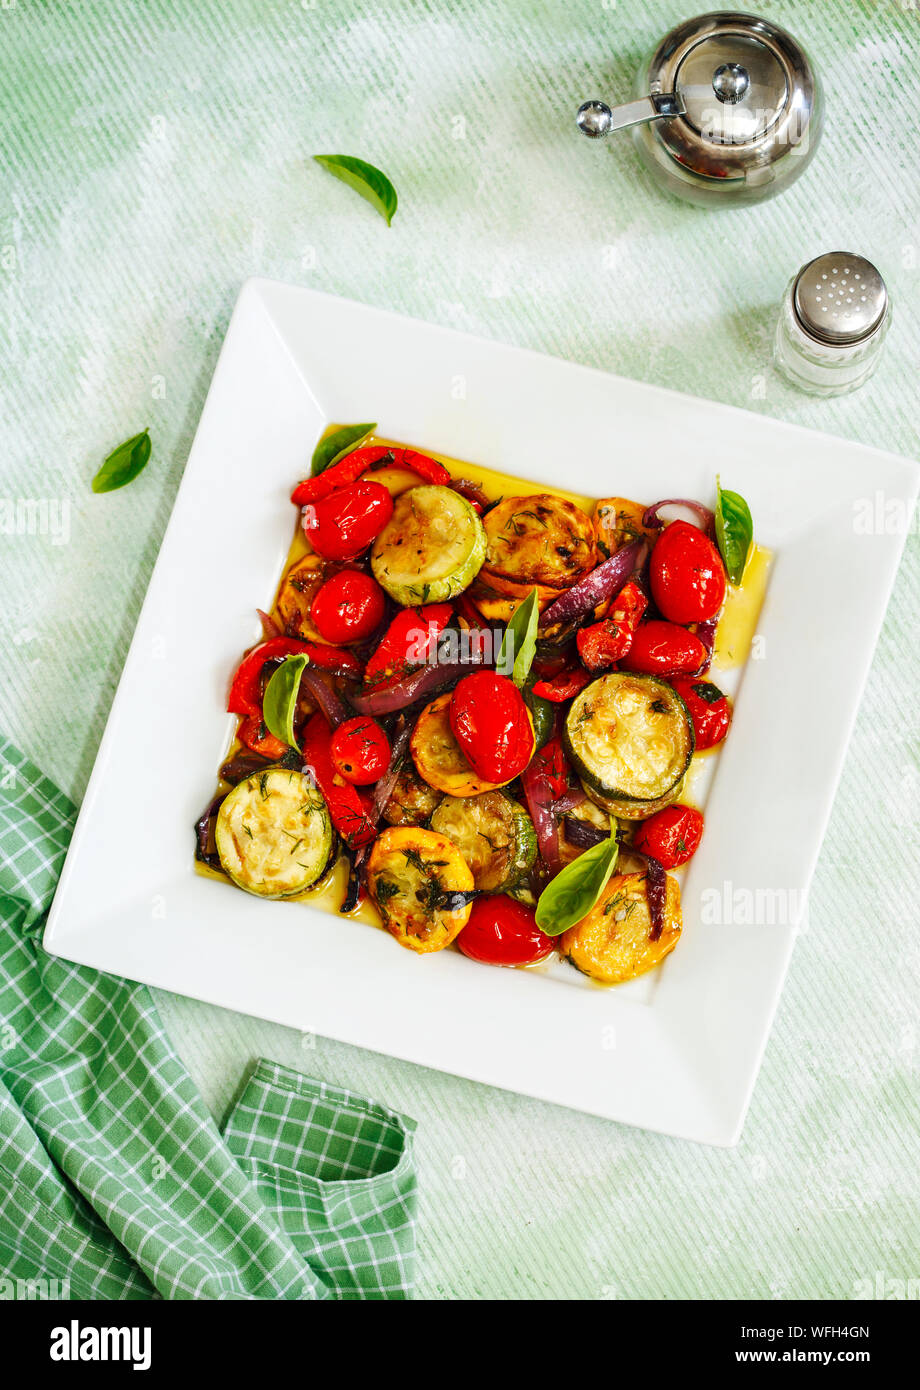 Grilled vegetable salad with peppers, courgettes, onions and tomatoes Stock Photo